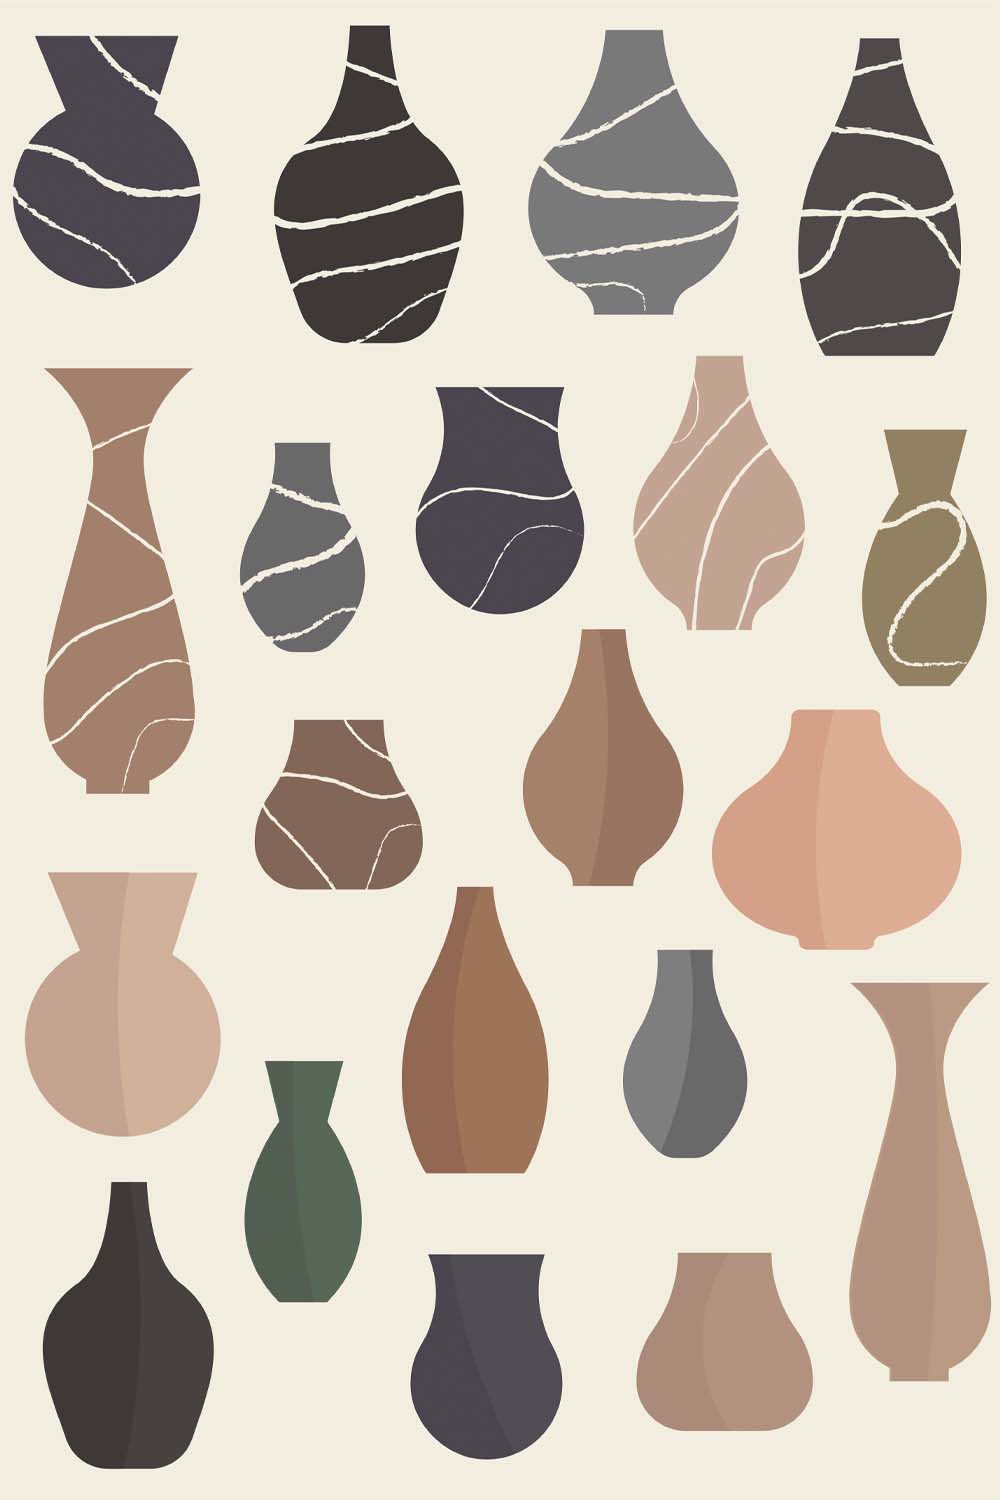 Pottery Illustrations In Different Styles Bundles pinterest image.